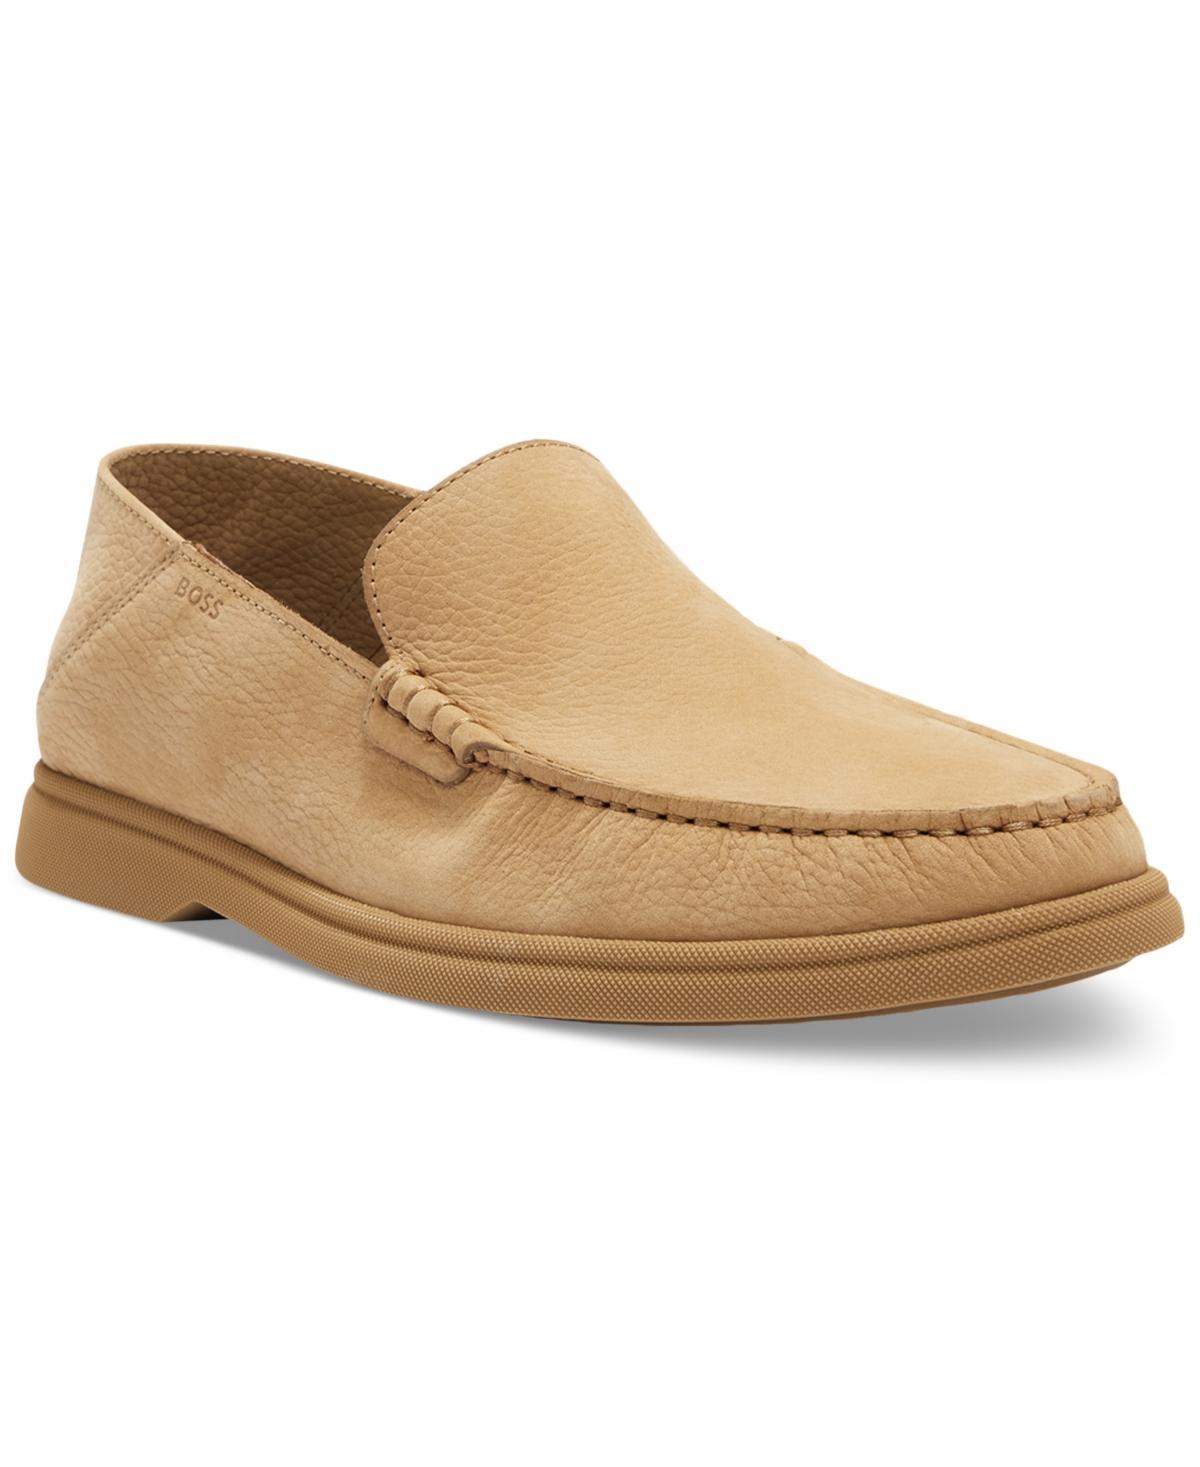 Mens Nubuck Moccasins Loafers With Embossed Logo And Apron Toe Product Image